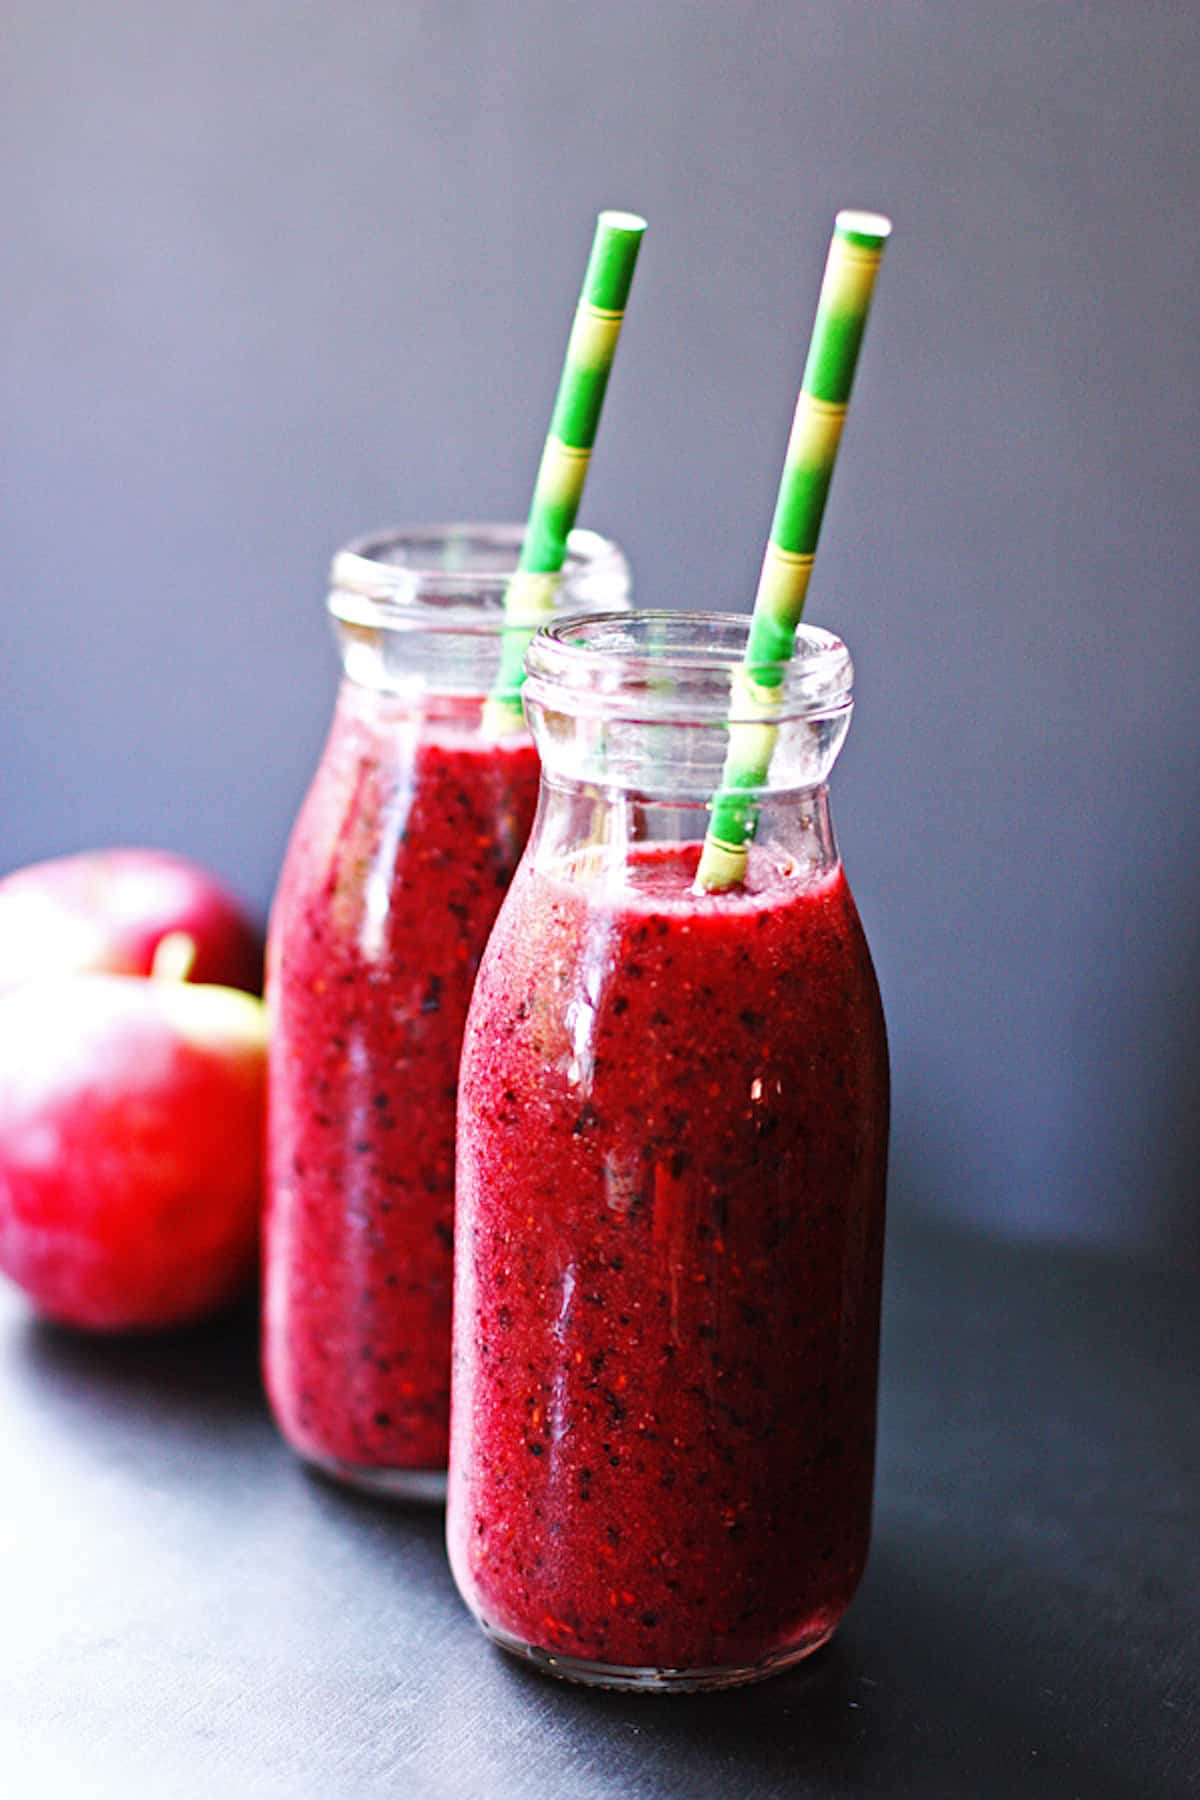 Two jars of apple berry smoothie with green straws.